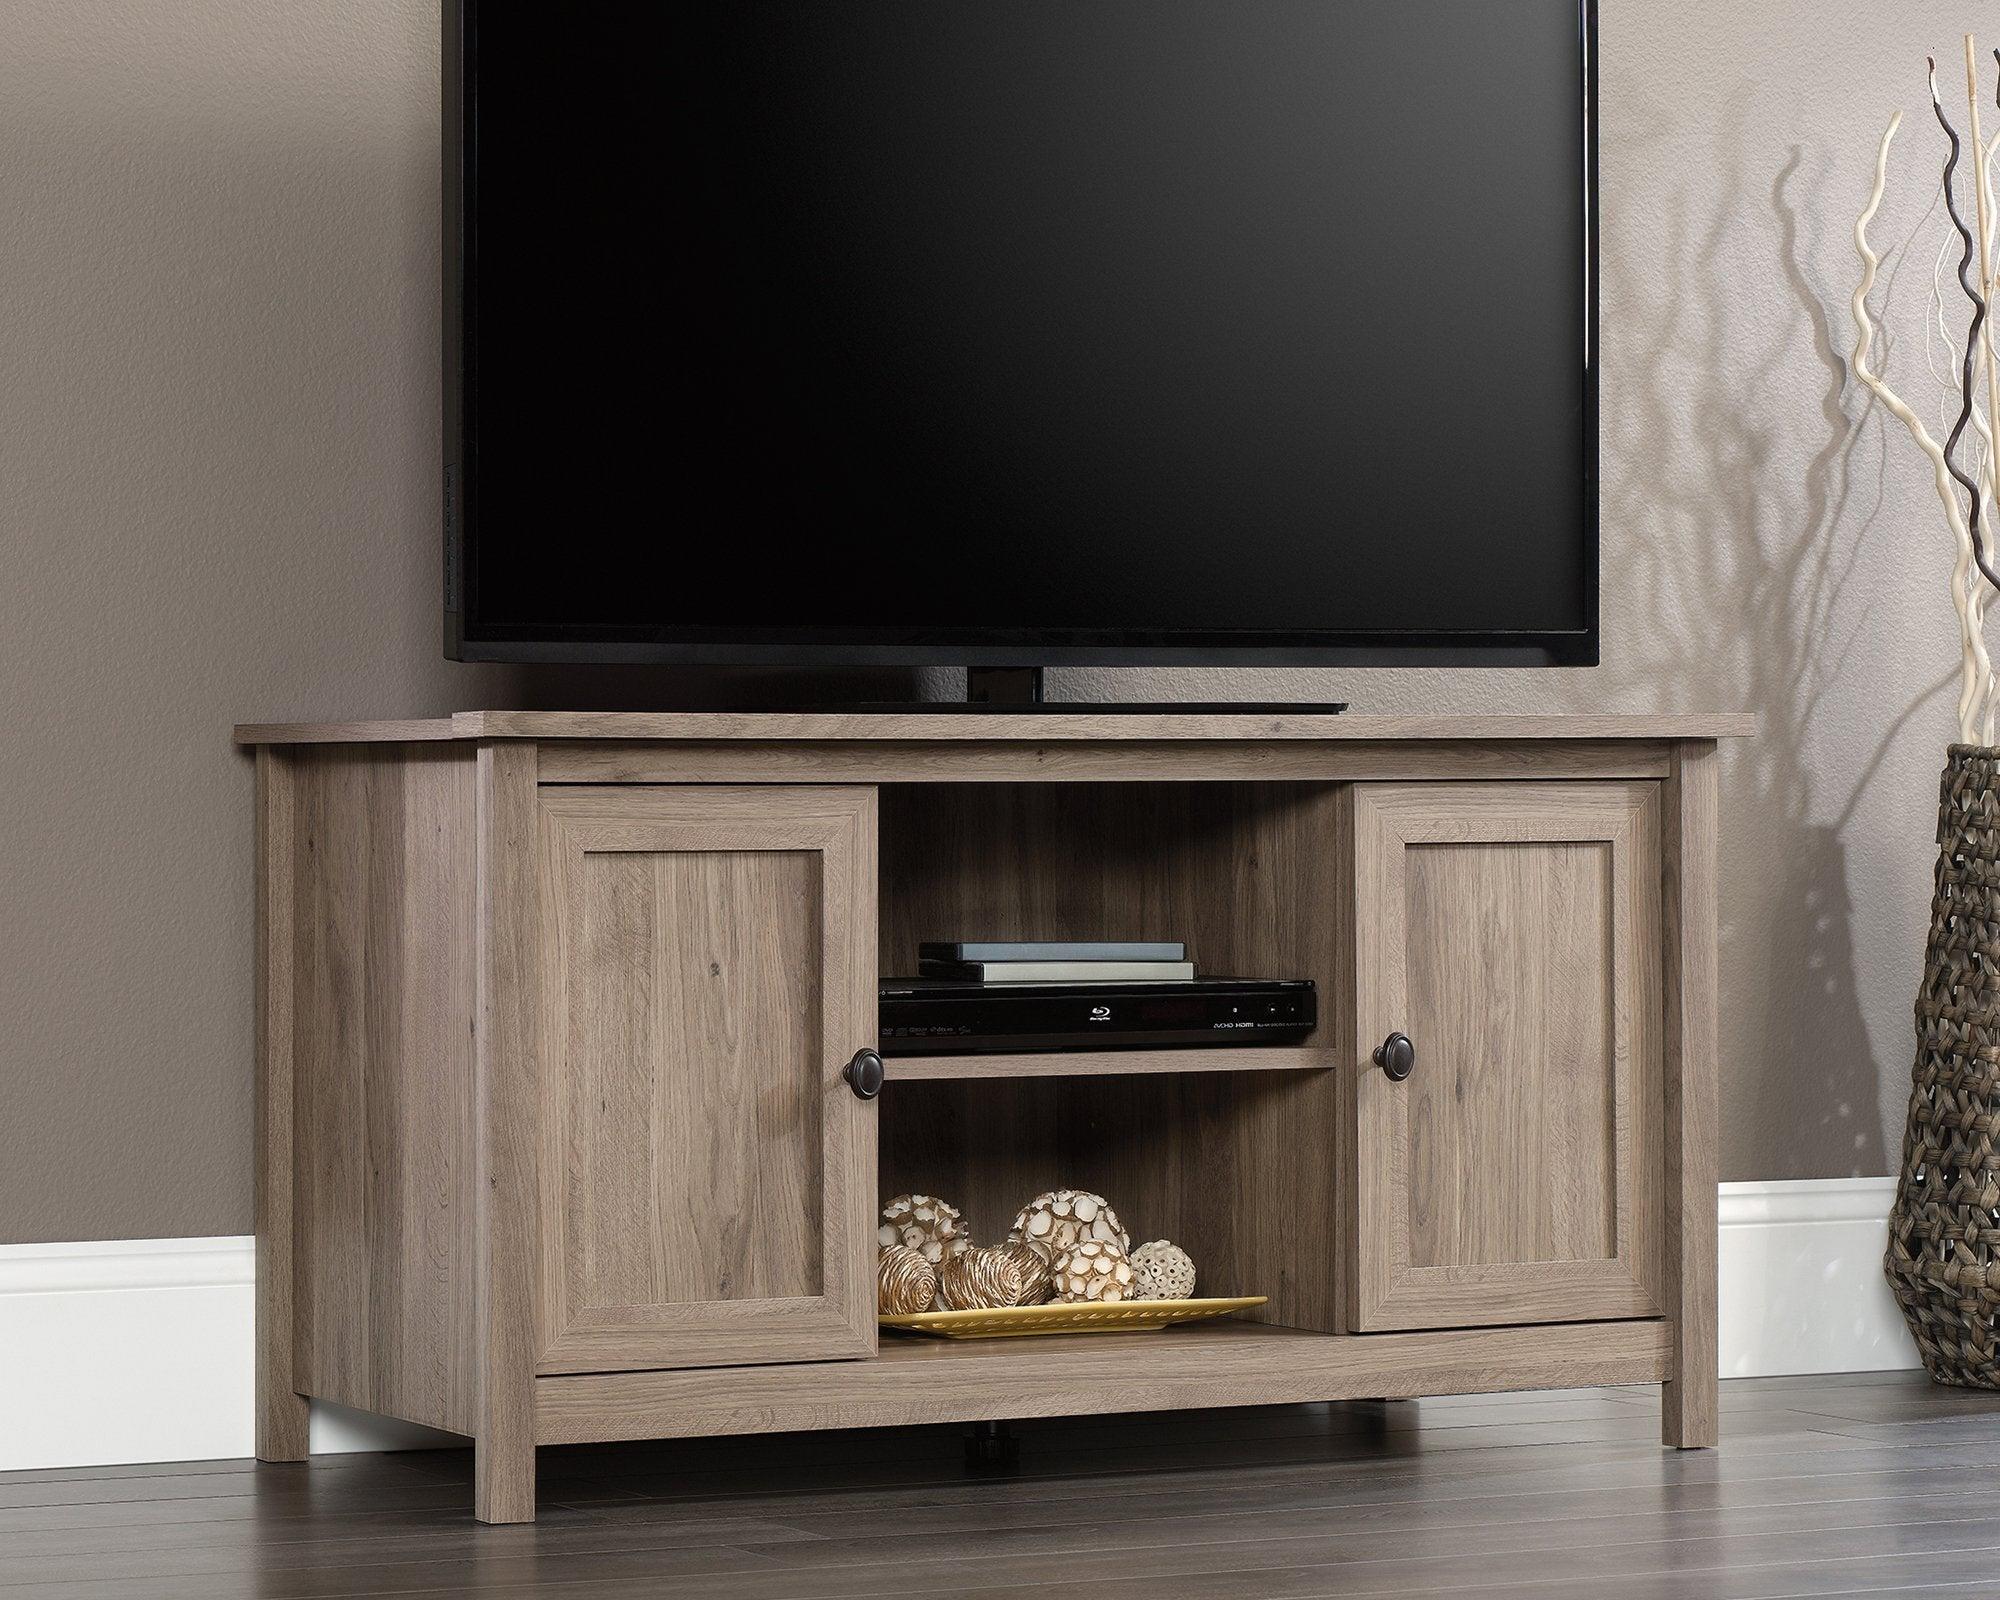 Barrister home low tv stand - image 1